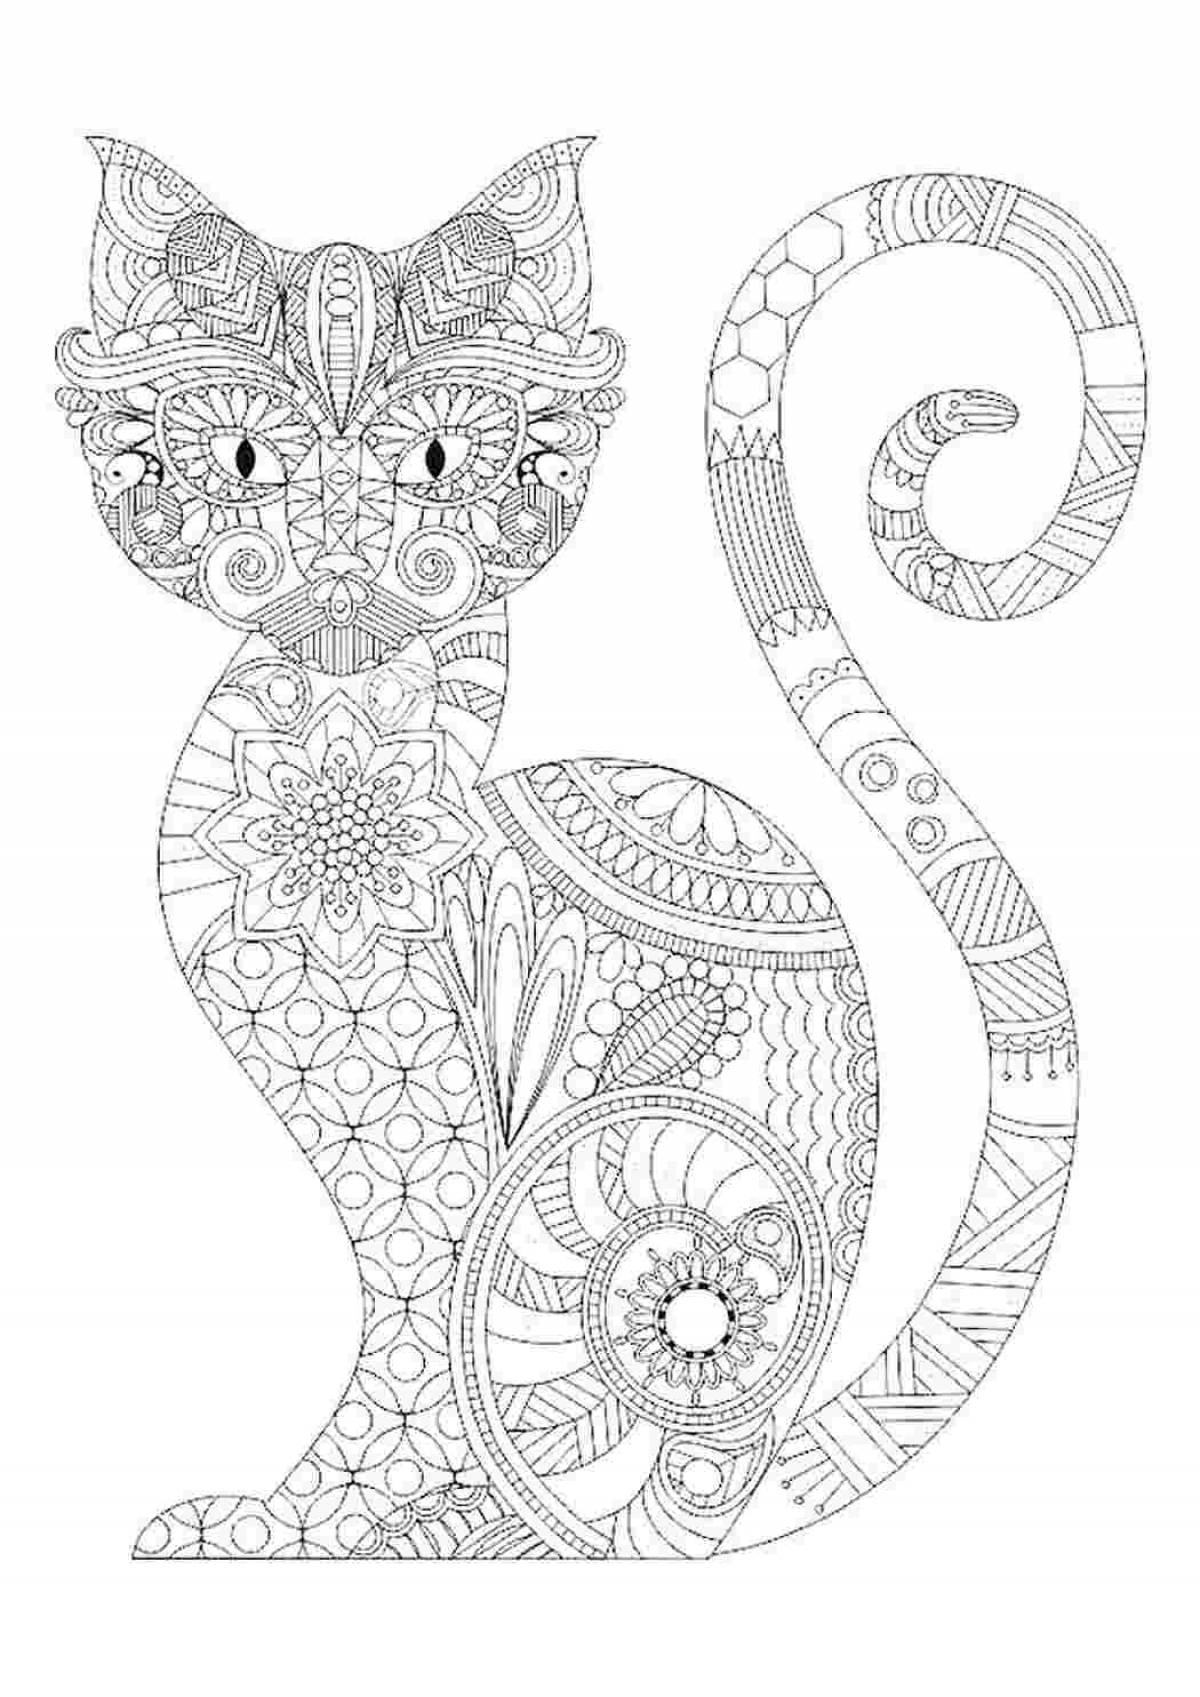 Fancy cat coloring page